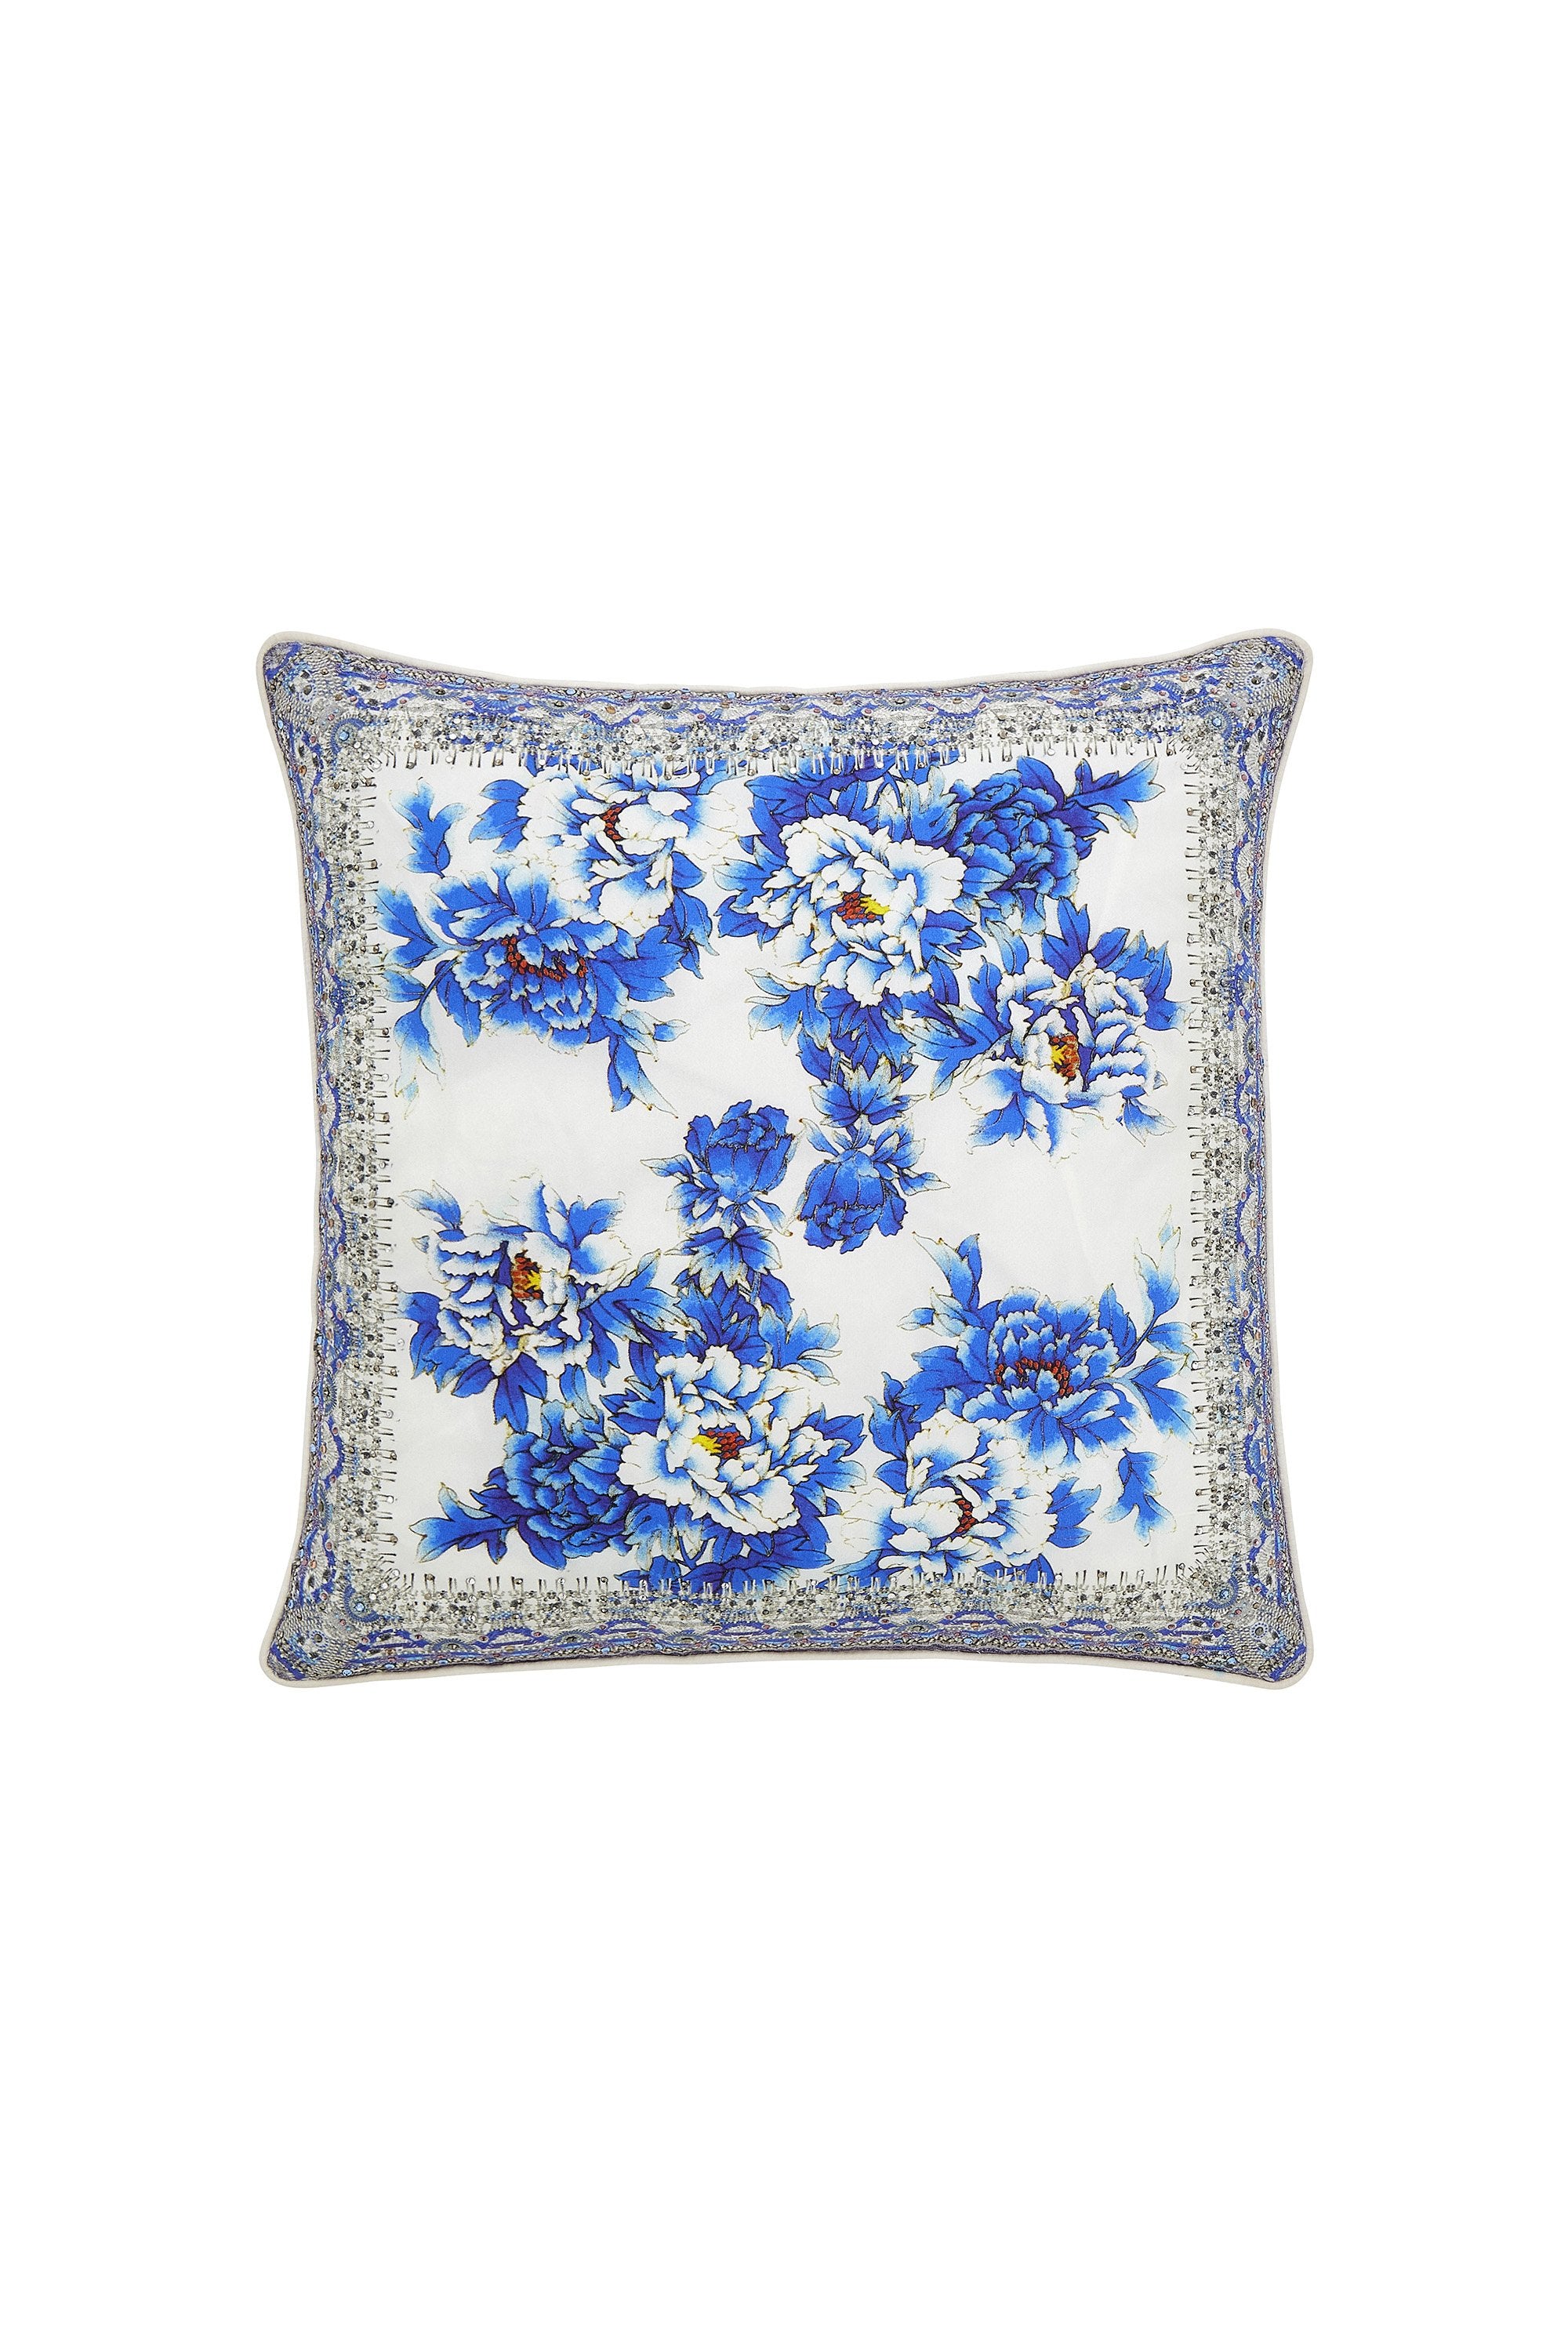 RING OF ROSES SMALL SQUARE CUSHION